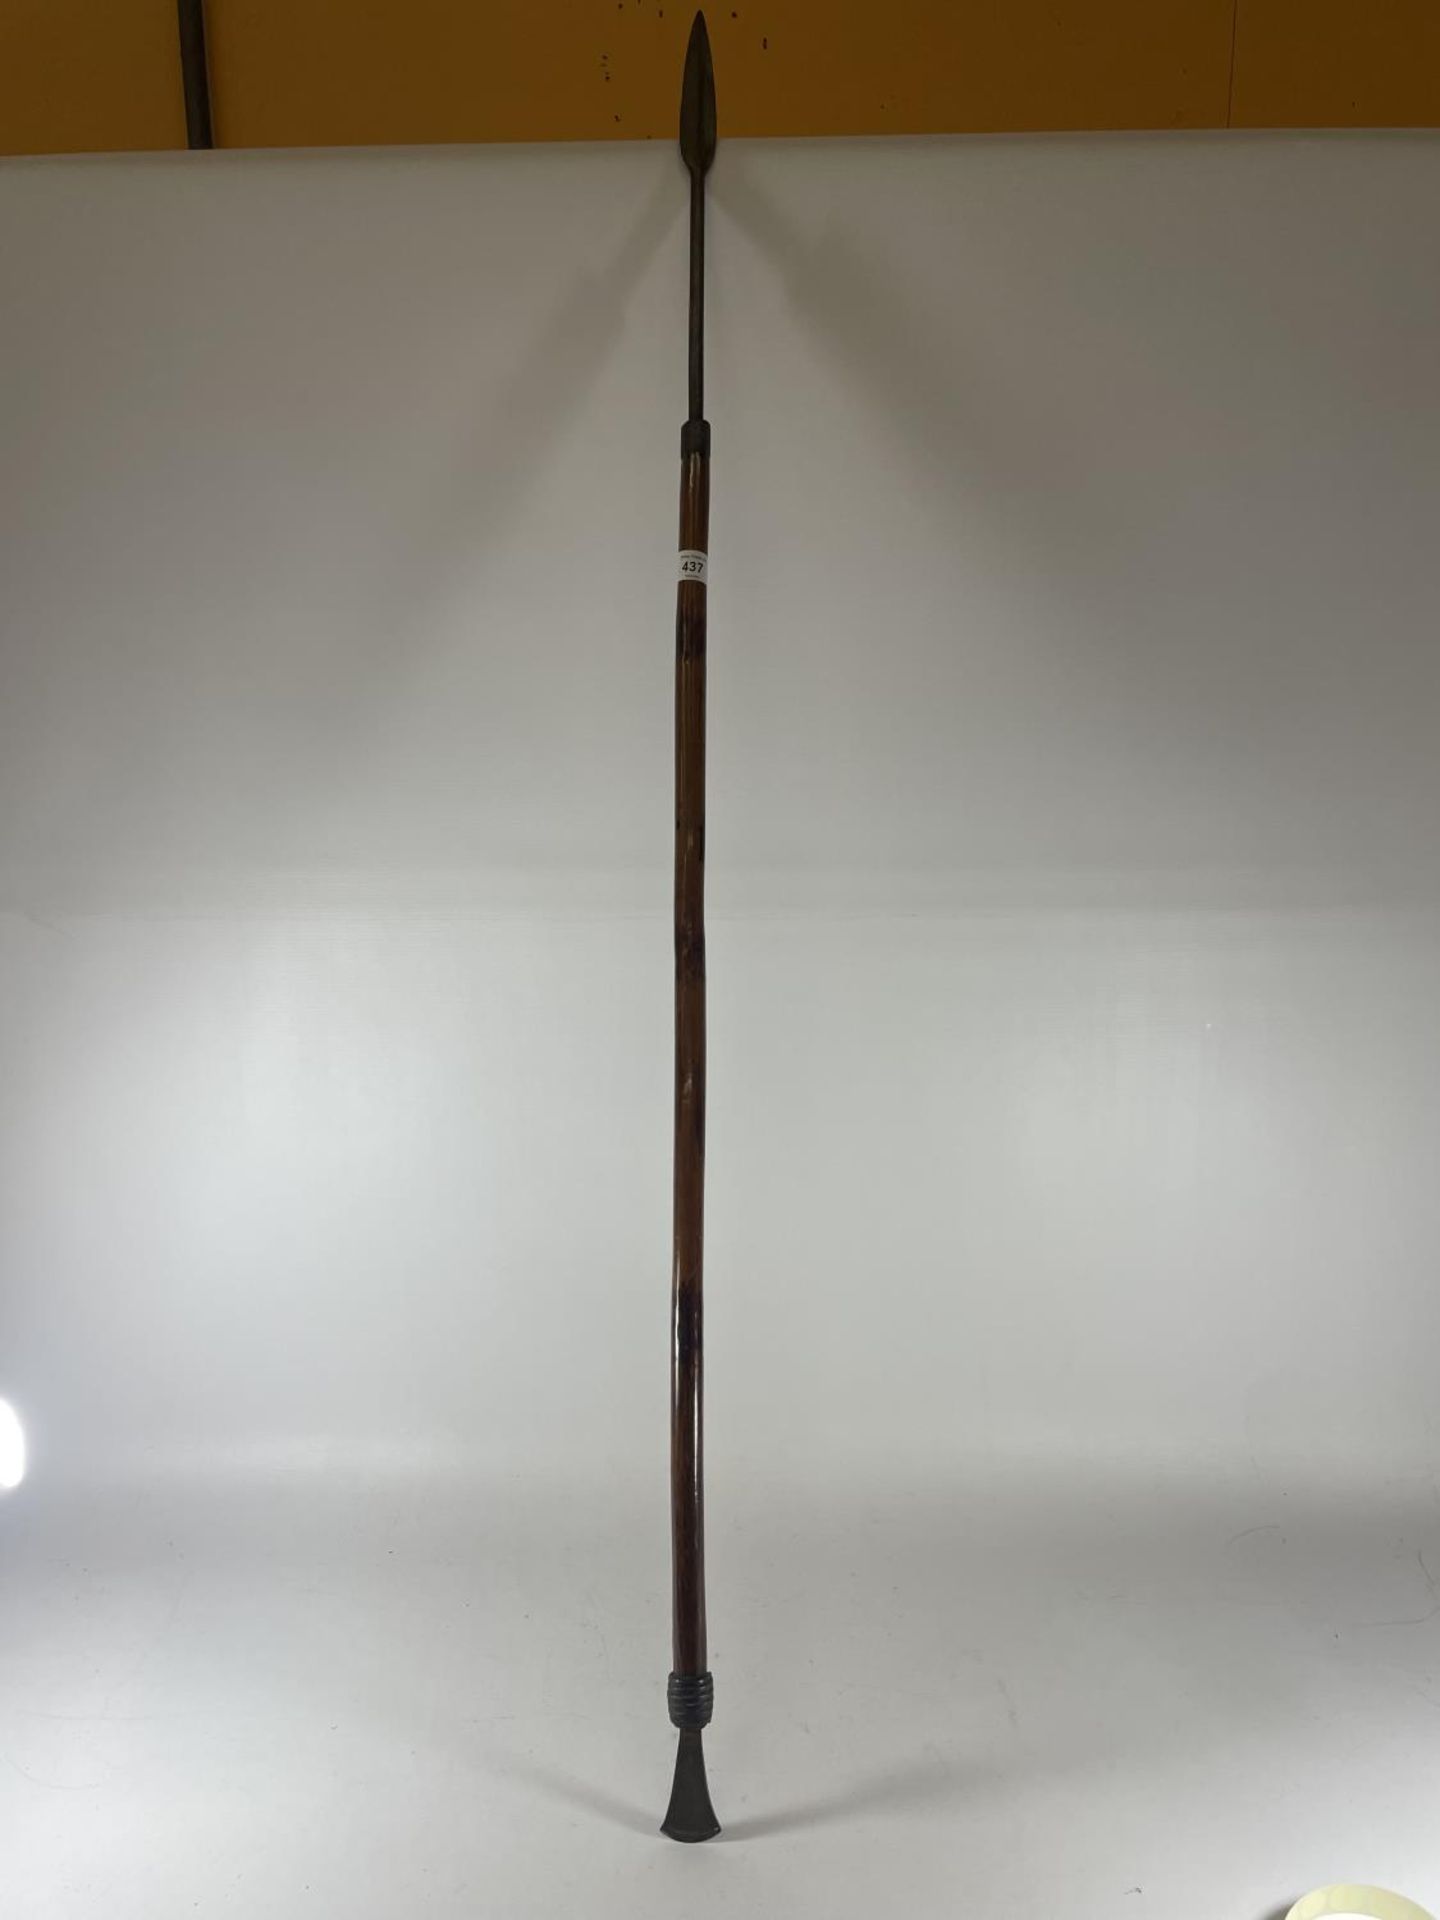 A LATE 19TH / EARLY 20TH CENTURY AFRICAN SPEAR, LENGTH 127CM